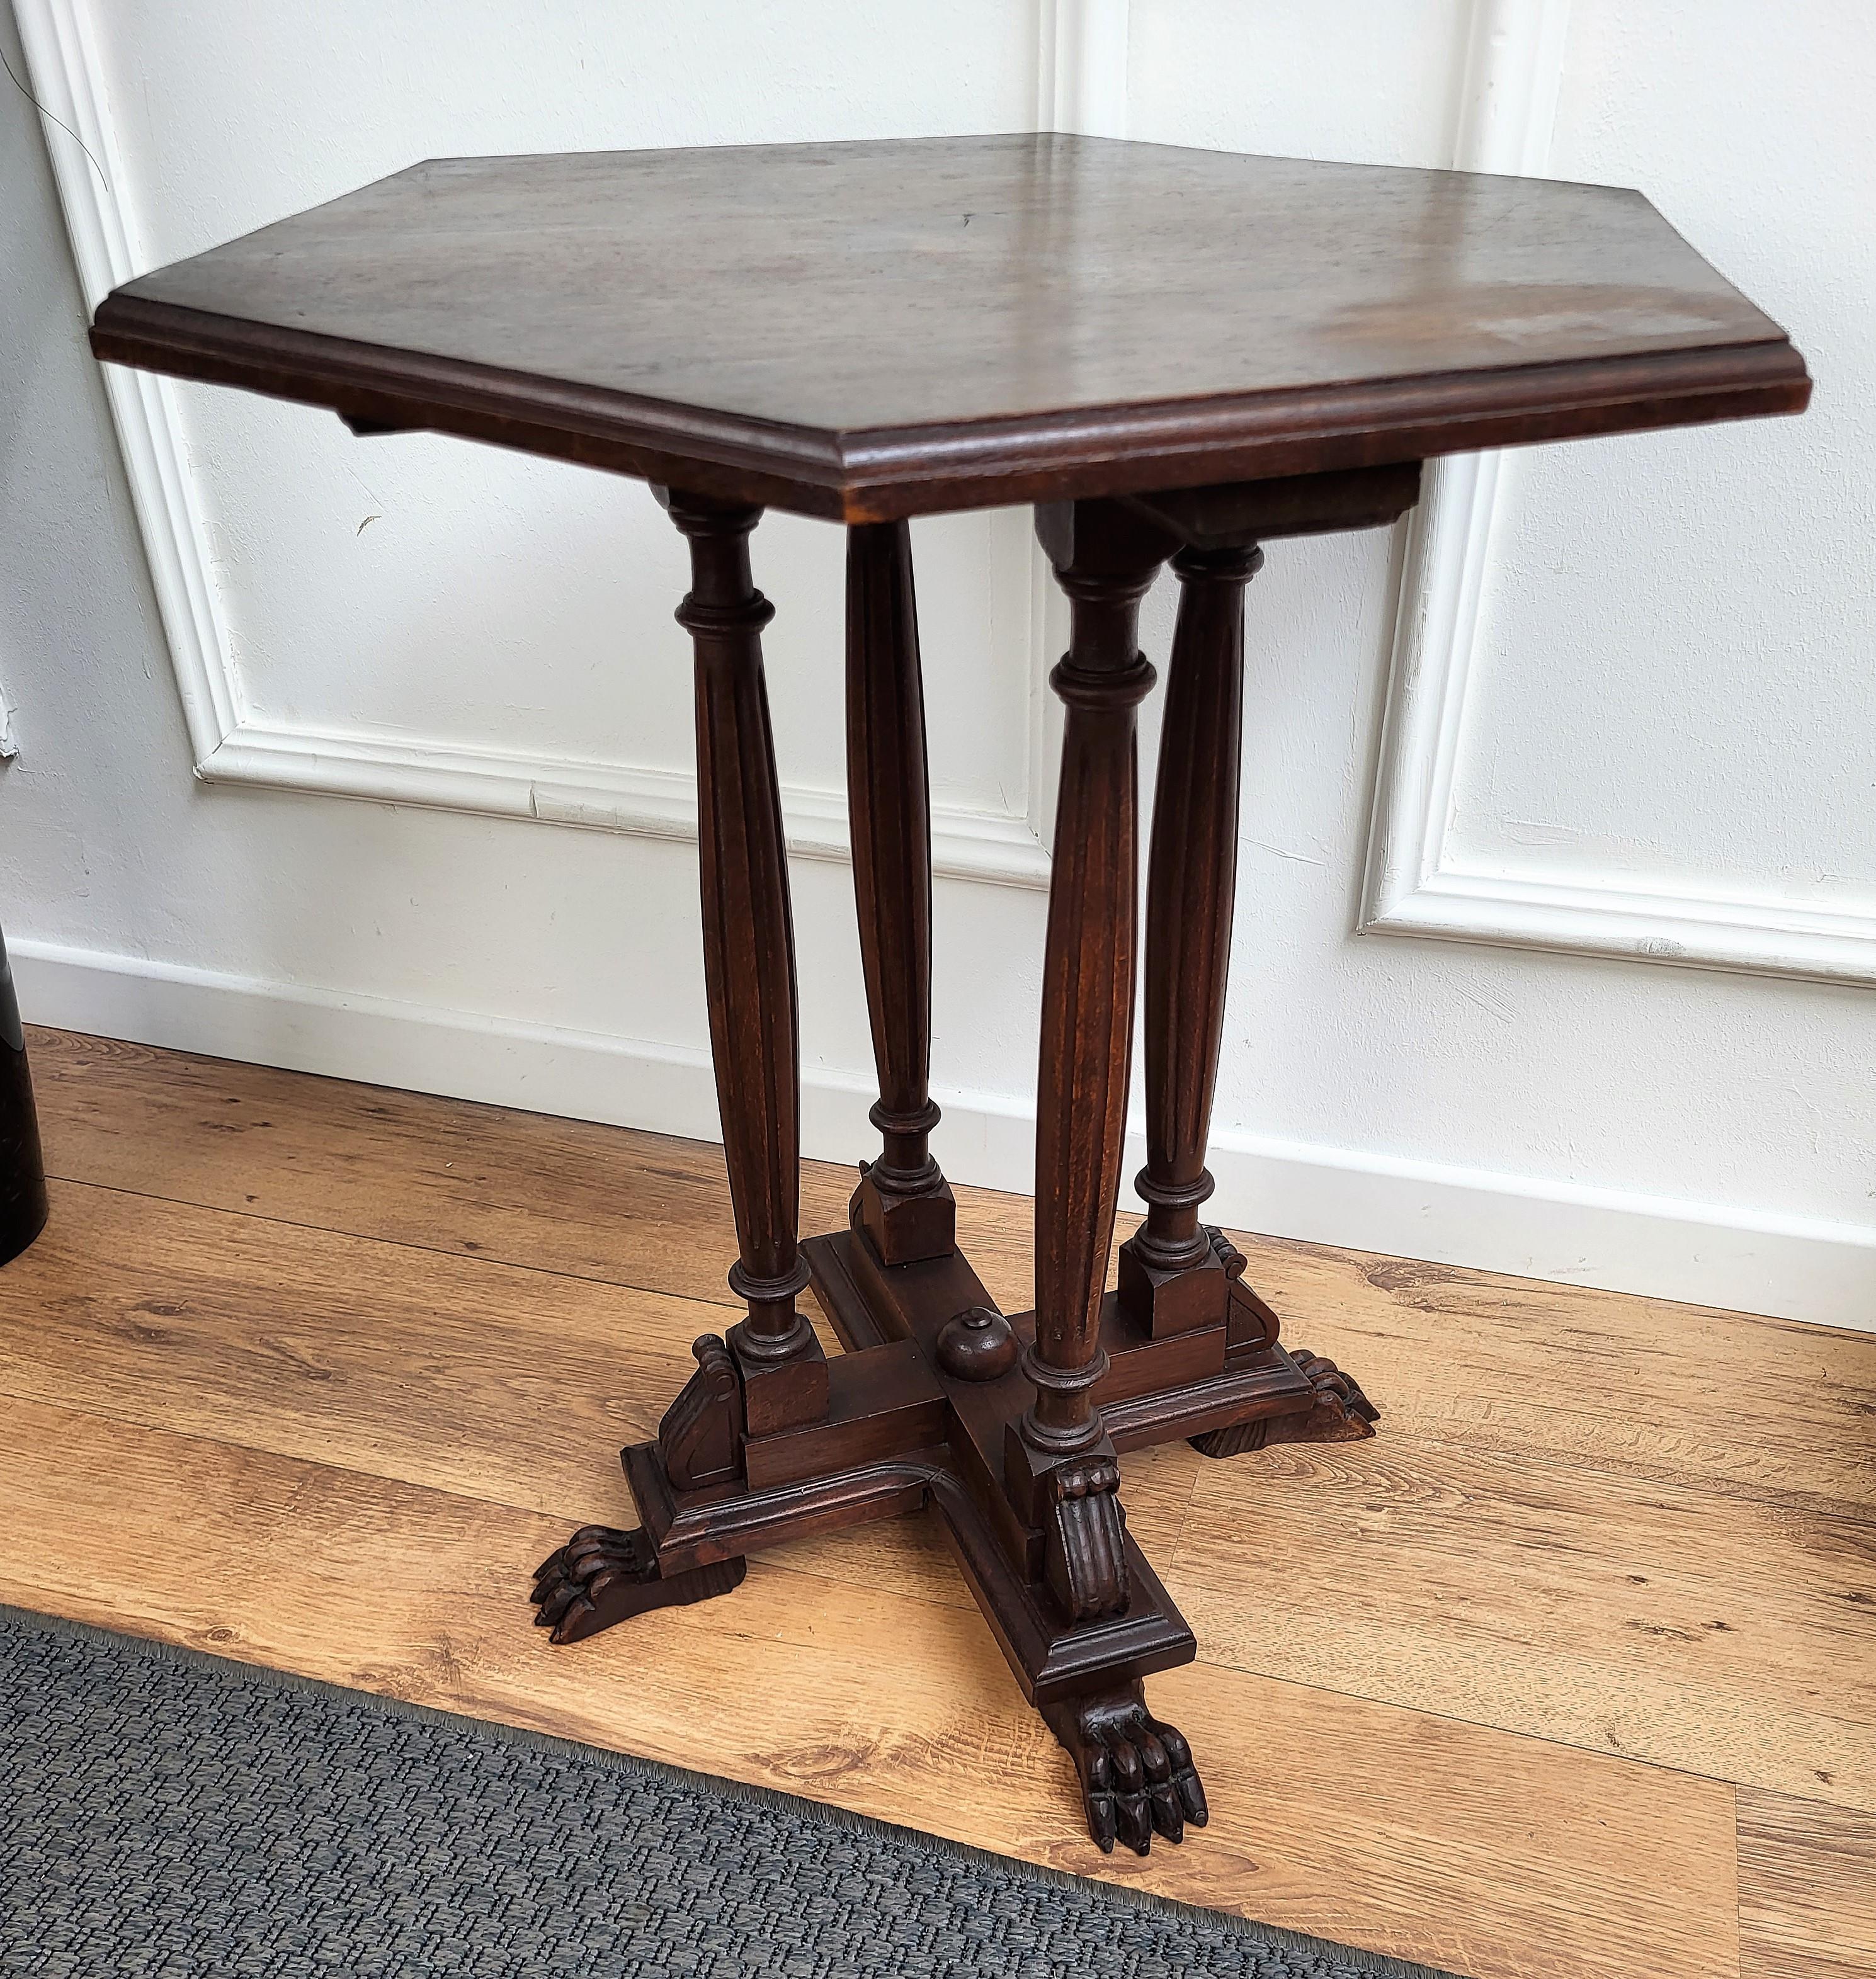 20th Century Antique Italian Hexagonal Walnut Side Table Stool with Carved Legs Animal Feet For Sale